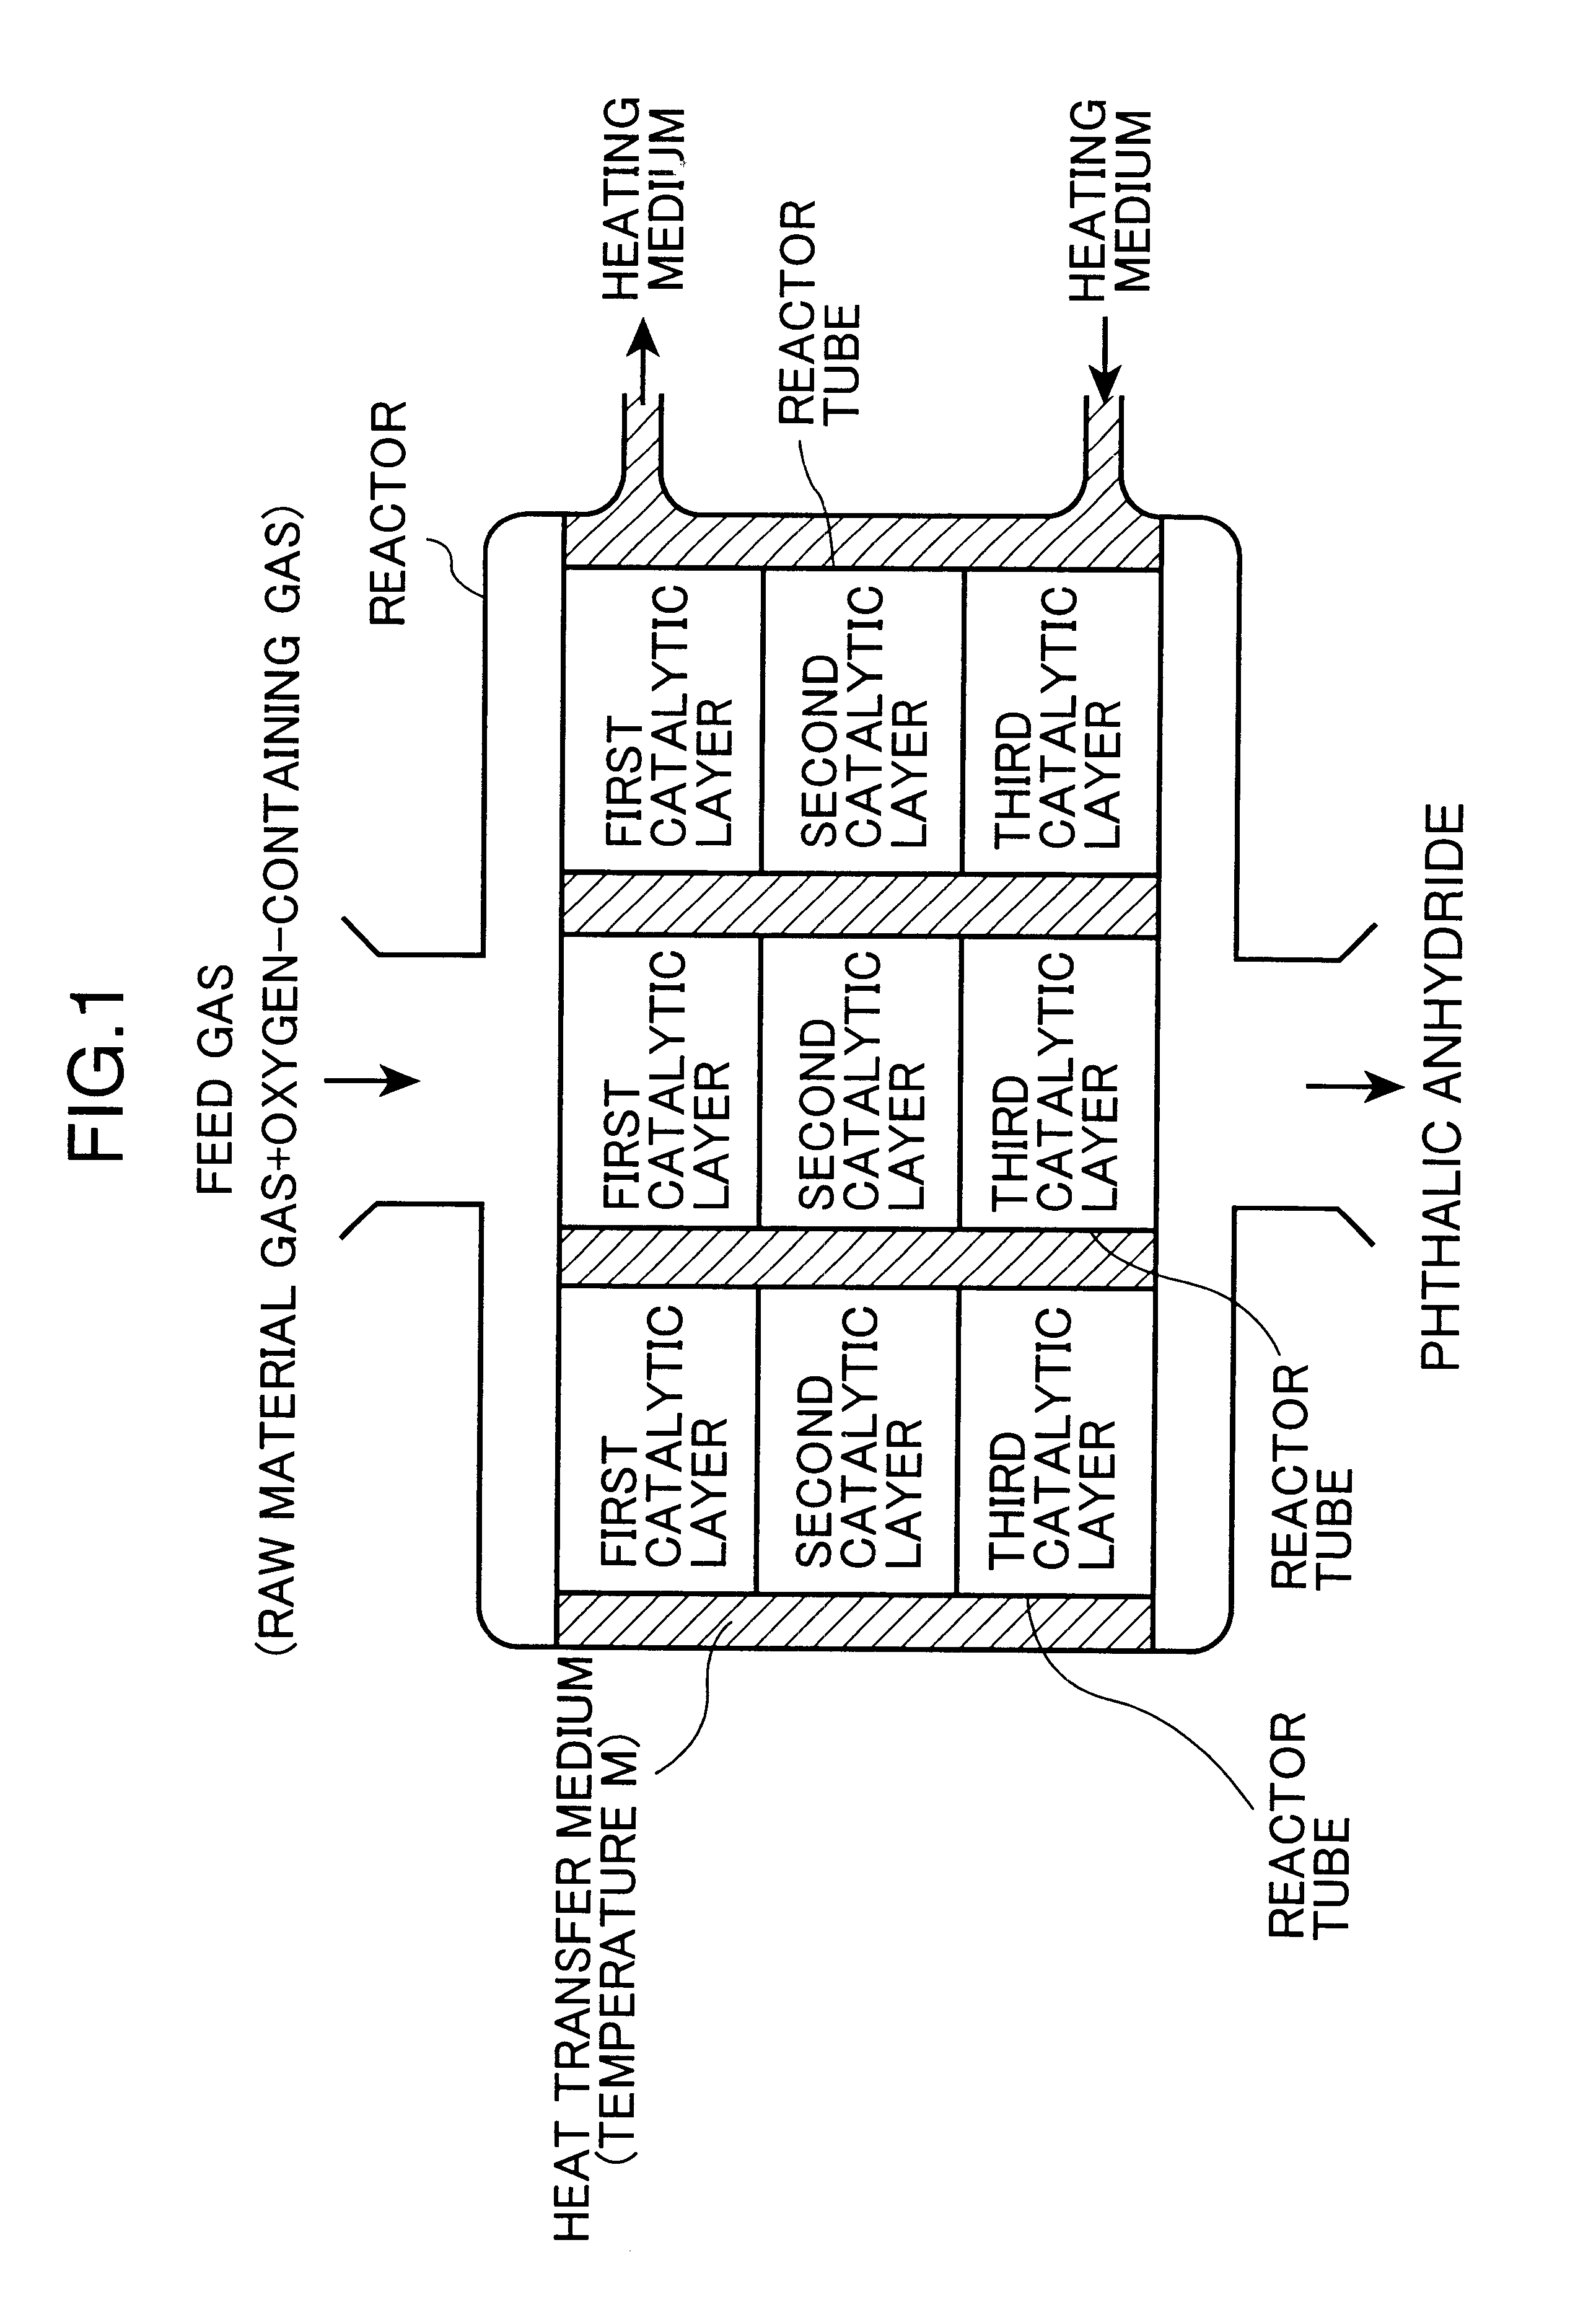 Process for producing phthalic anhydride